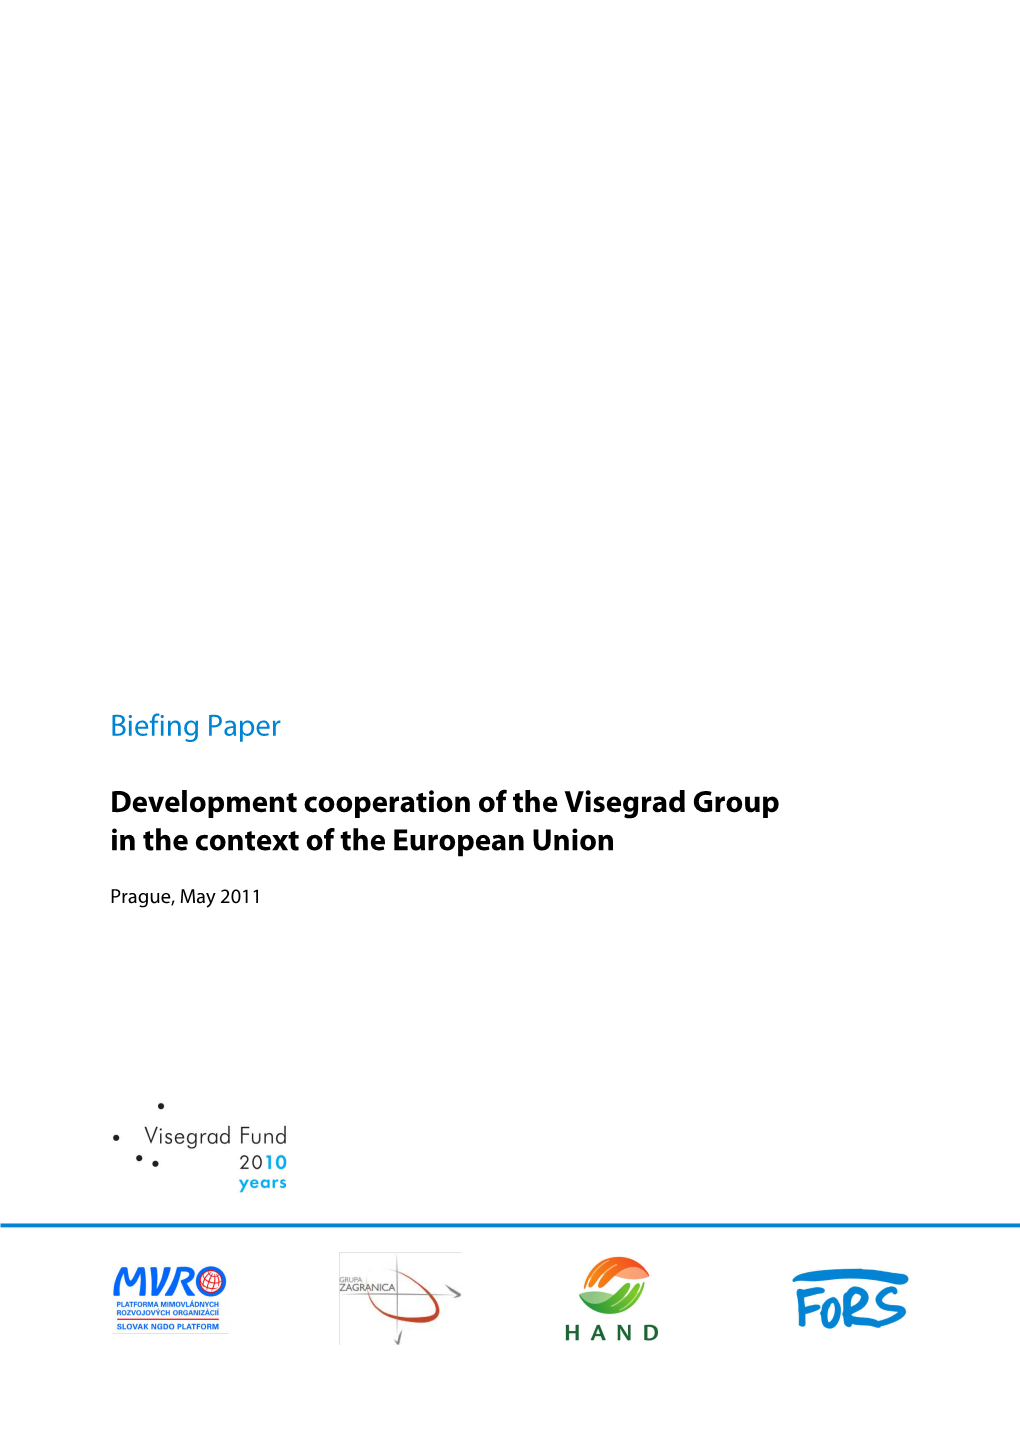 Development Cooperation of the Visegrad Group in the Context of the European Union